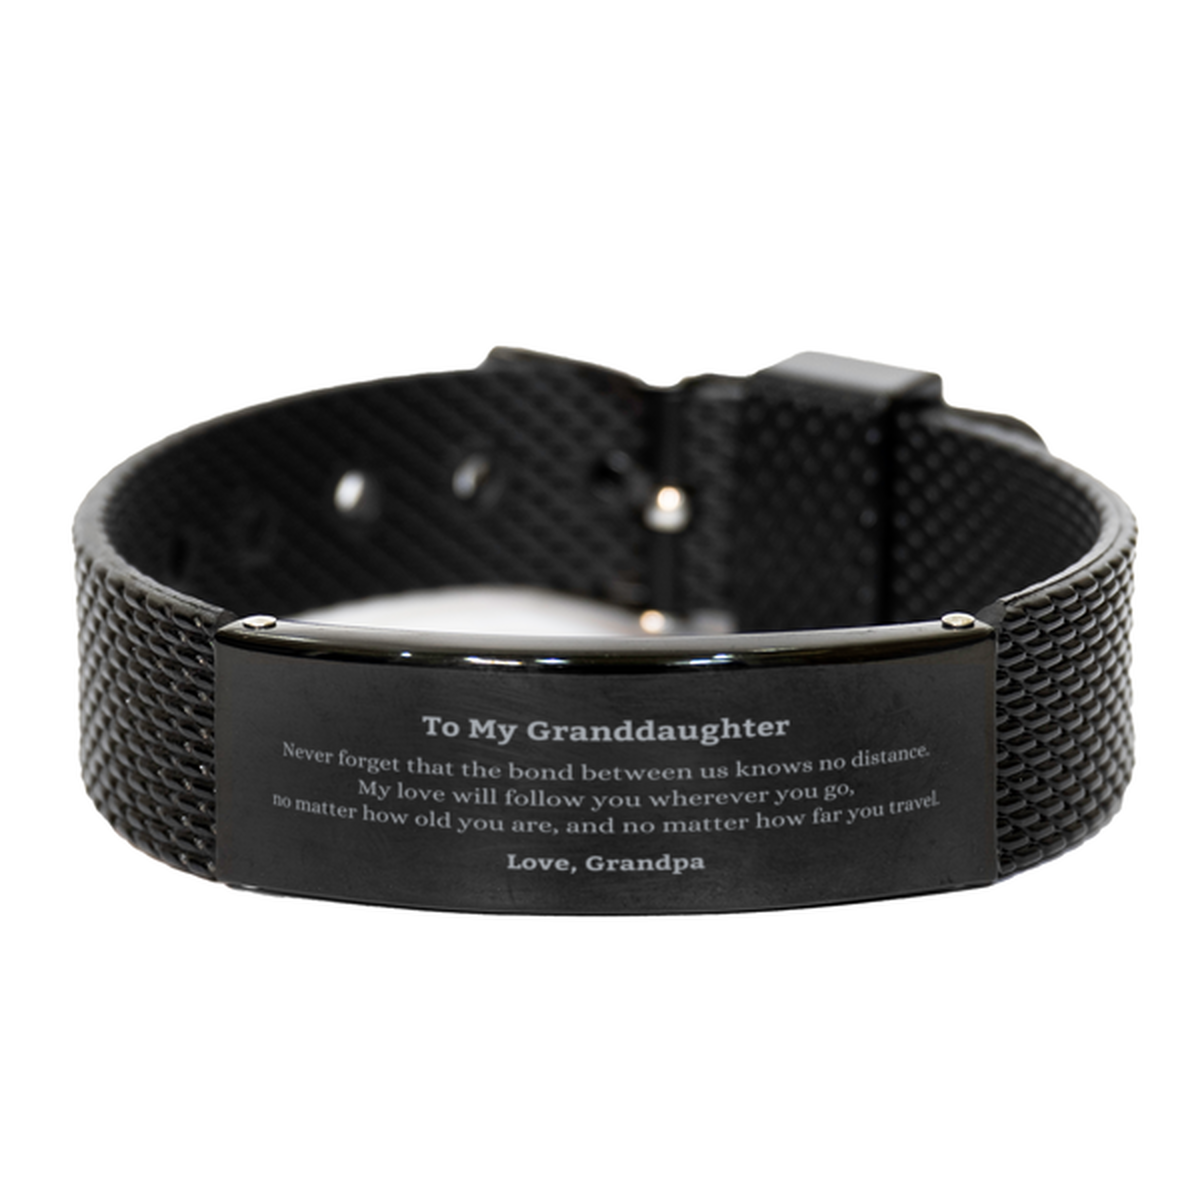 Granddaughter Birthday Gifts from Grandpa, Adjustable Black Shark Mesh Bracelet for Granddaughter Christmas Graduation Unique Gifts Granddaughter Never forget that the bond between us knows no distance. Love, Grandpa